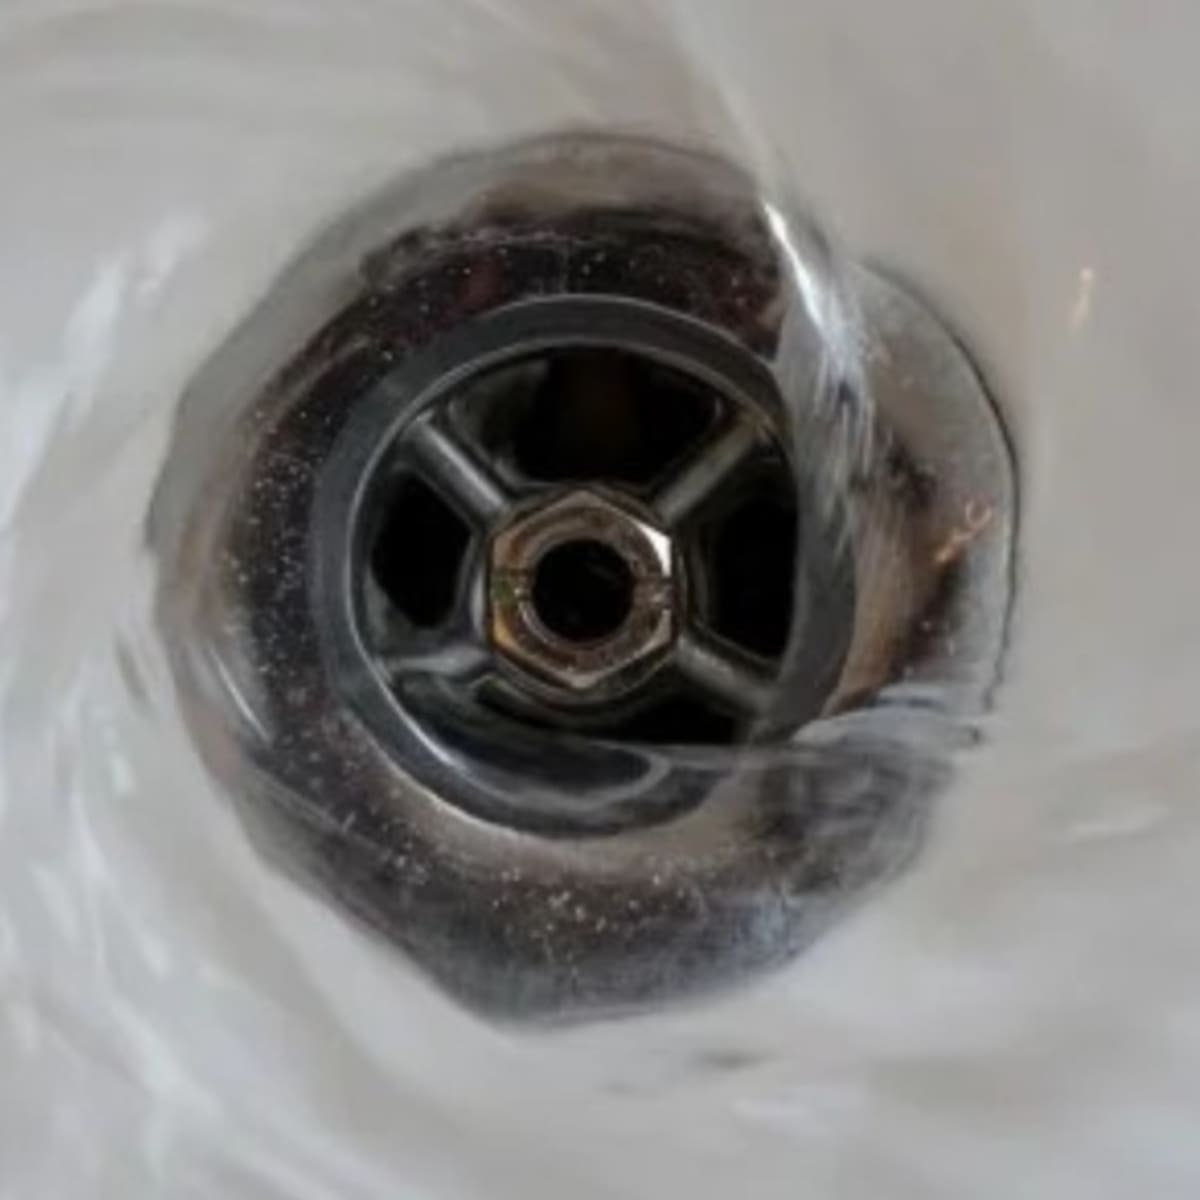 Sink Drain Clogged? How to Use a Plumber's Snake - Dengarden